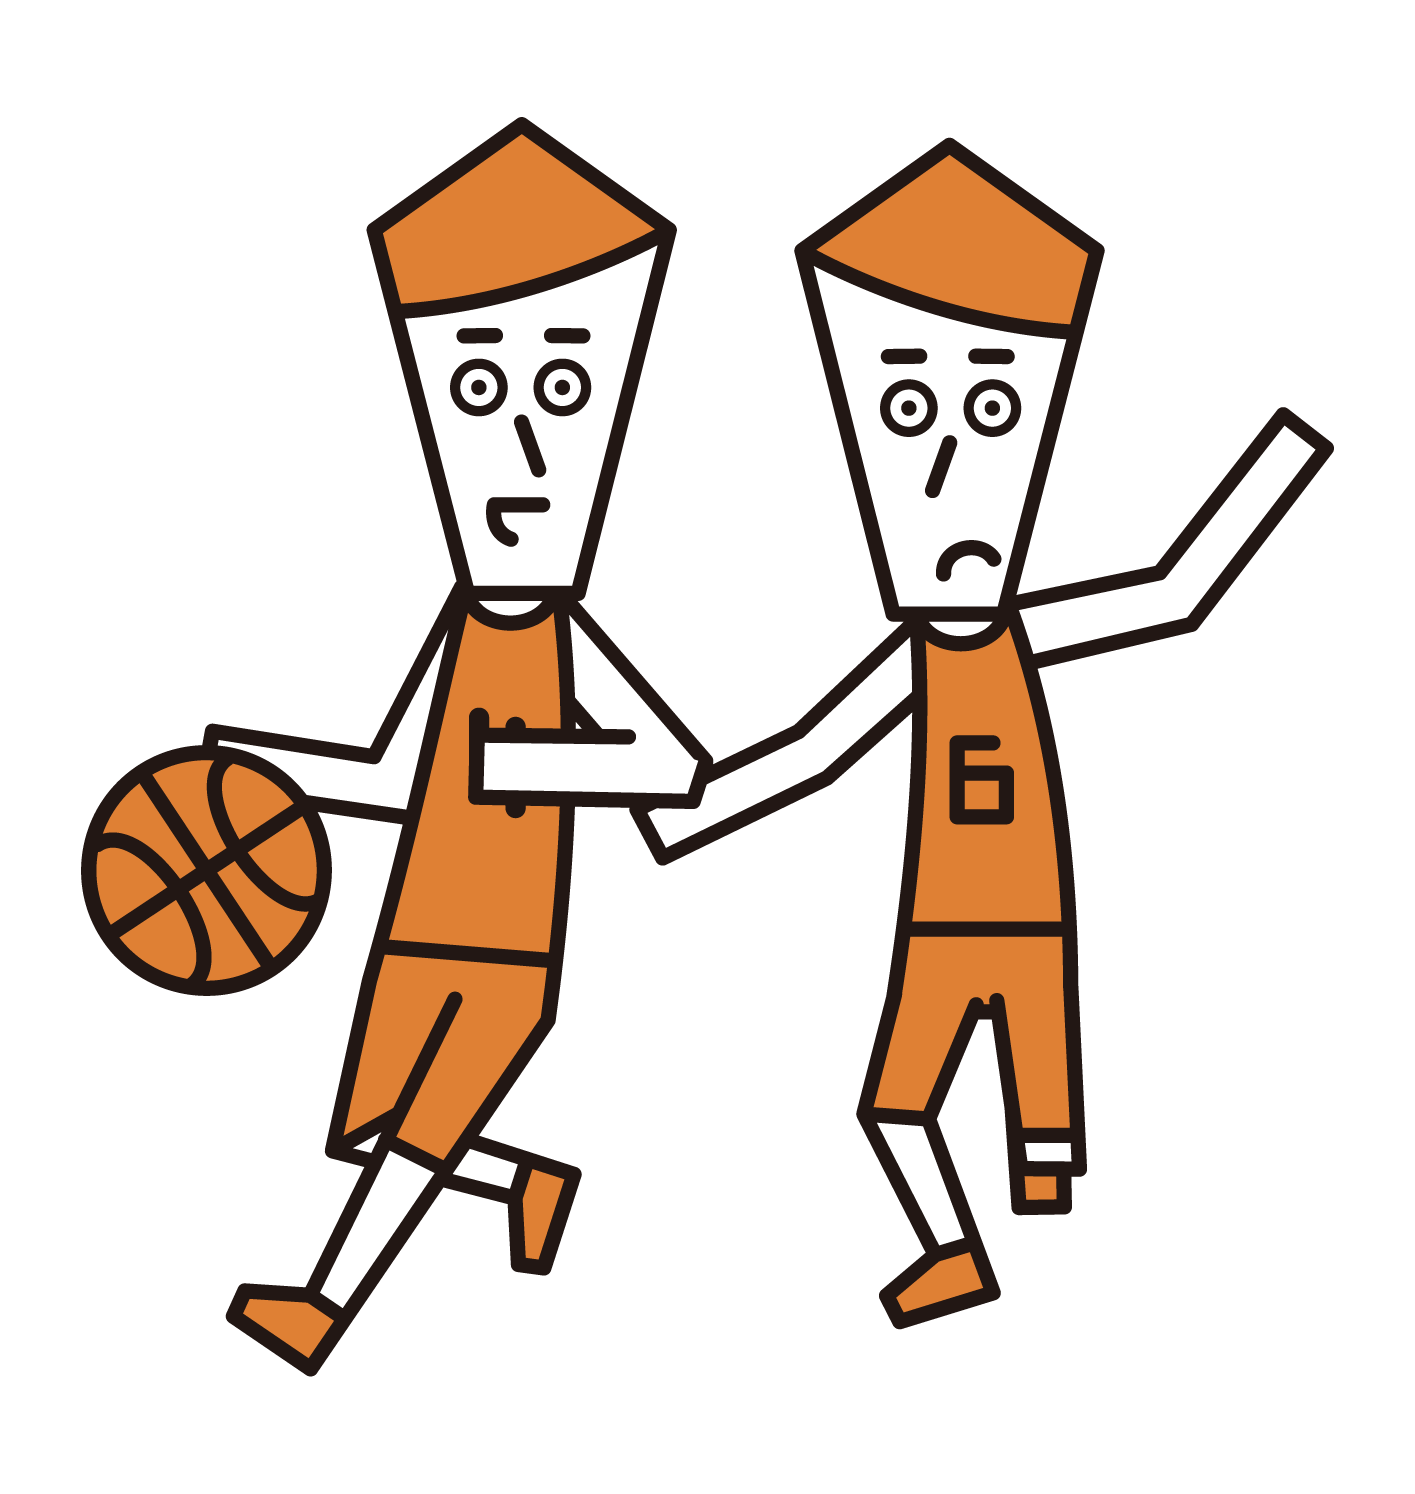 Illustration of a dribbling player and a basketball player (male) defending